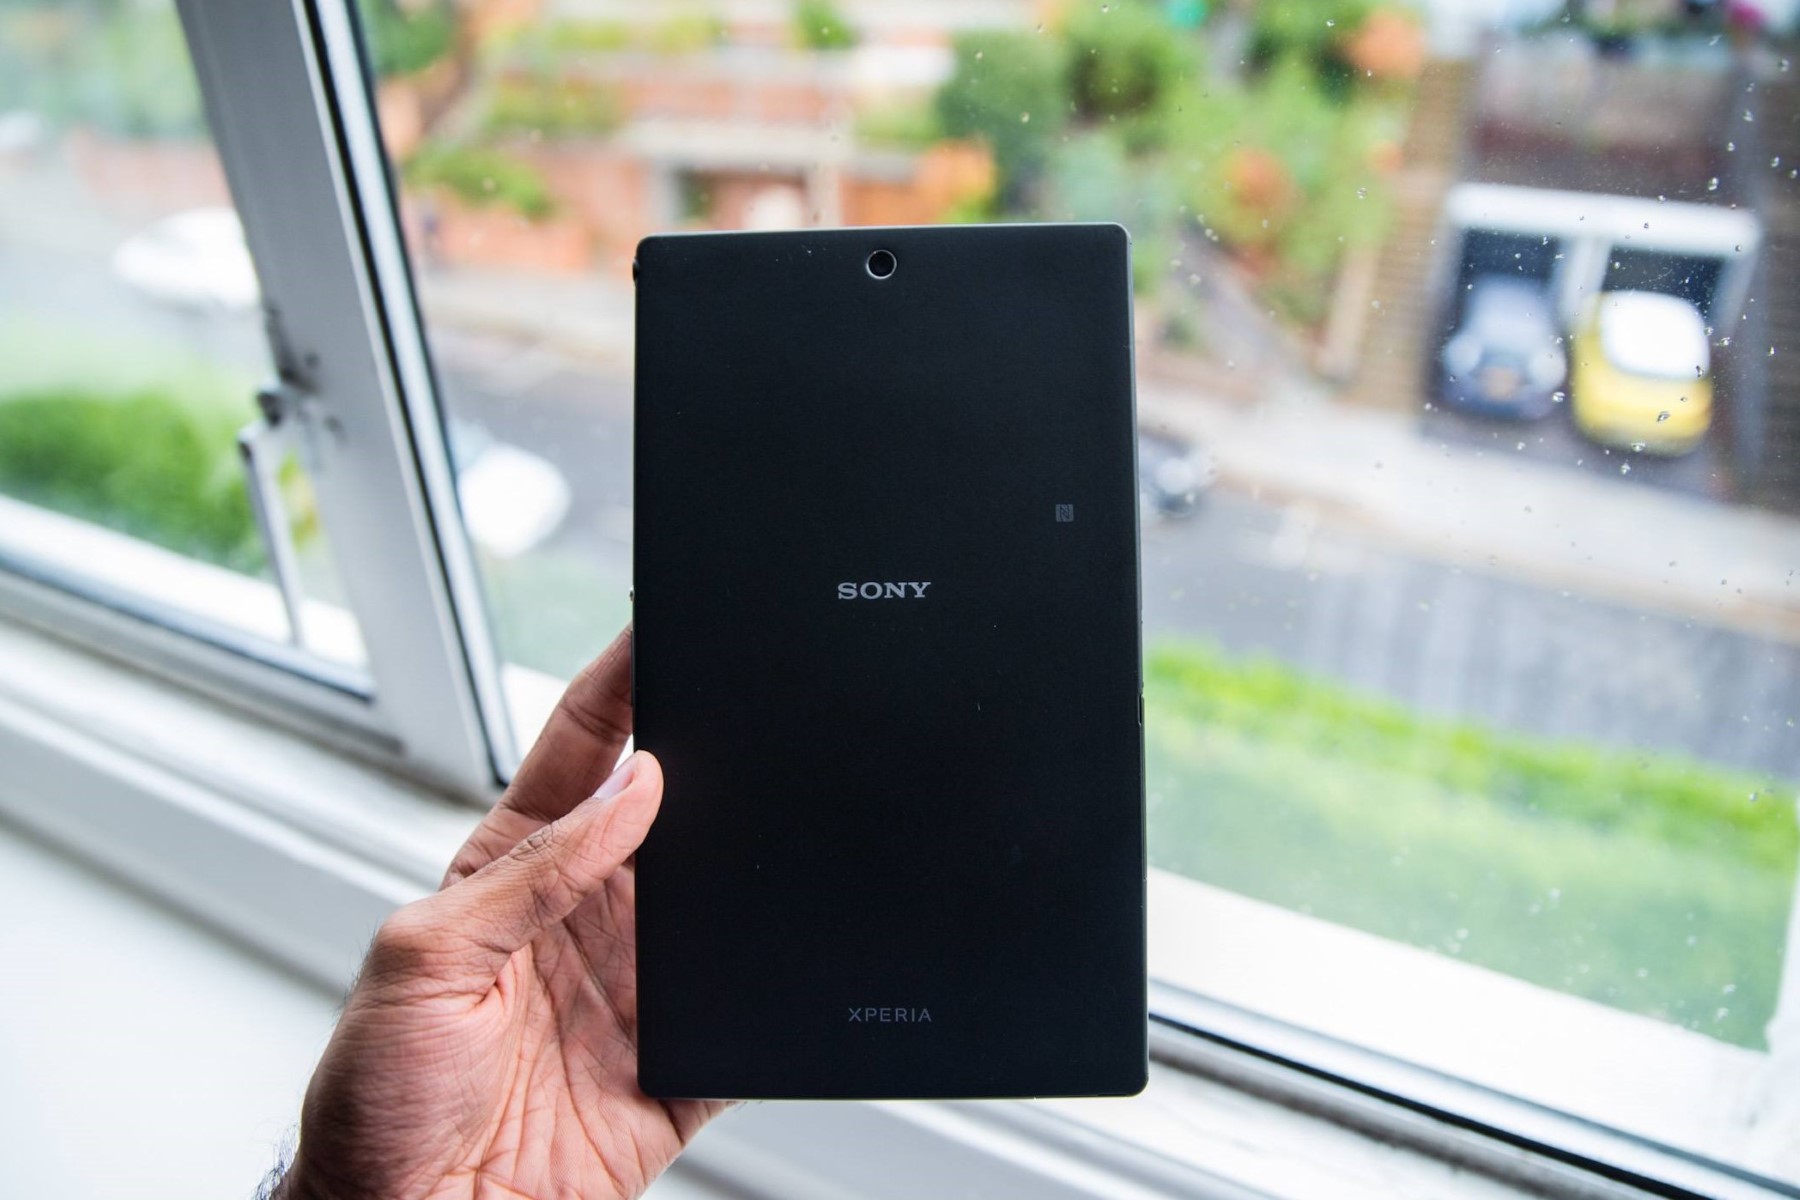 Xperia Z3 Tablet Camera Issue: Troubleshooting And Fixes